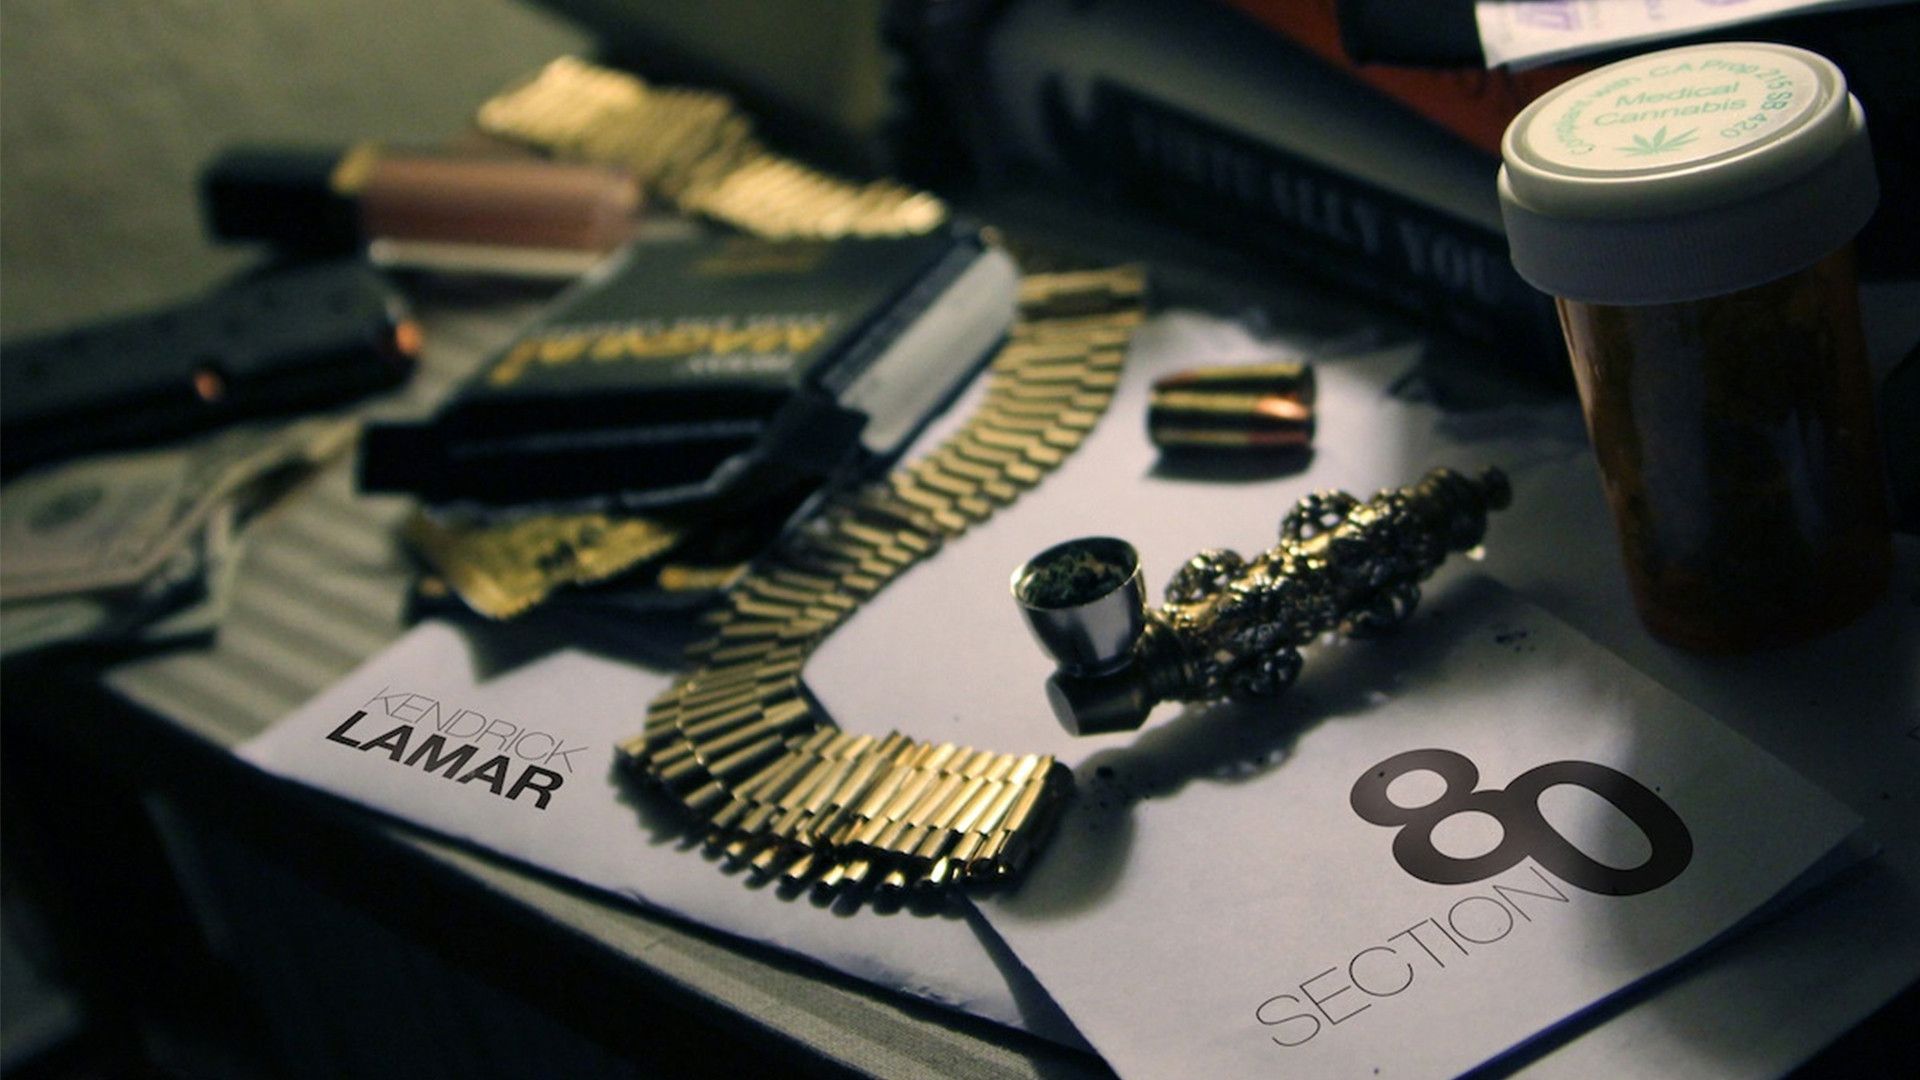 Section 80 Wallpapers